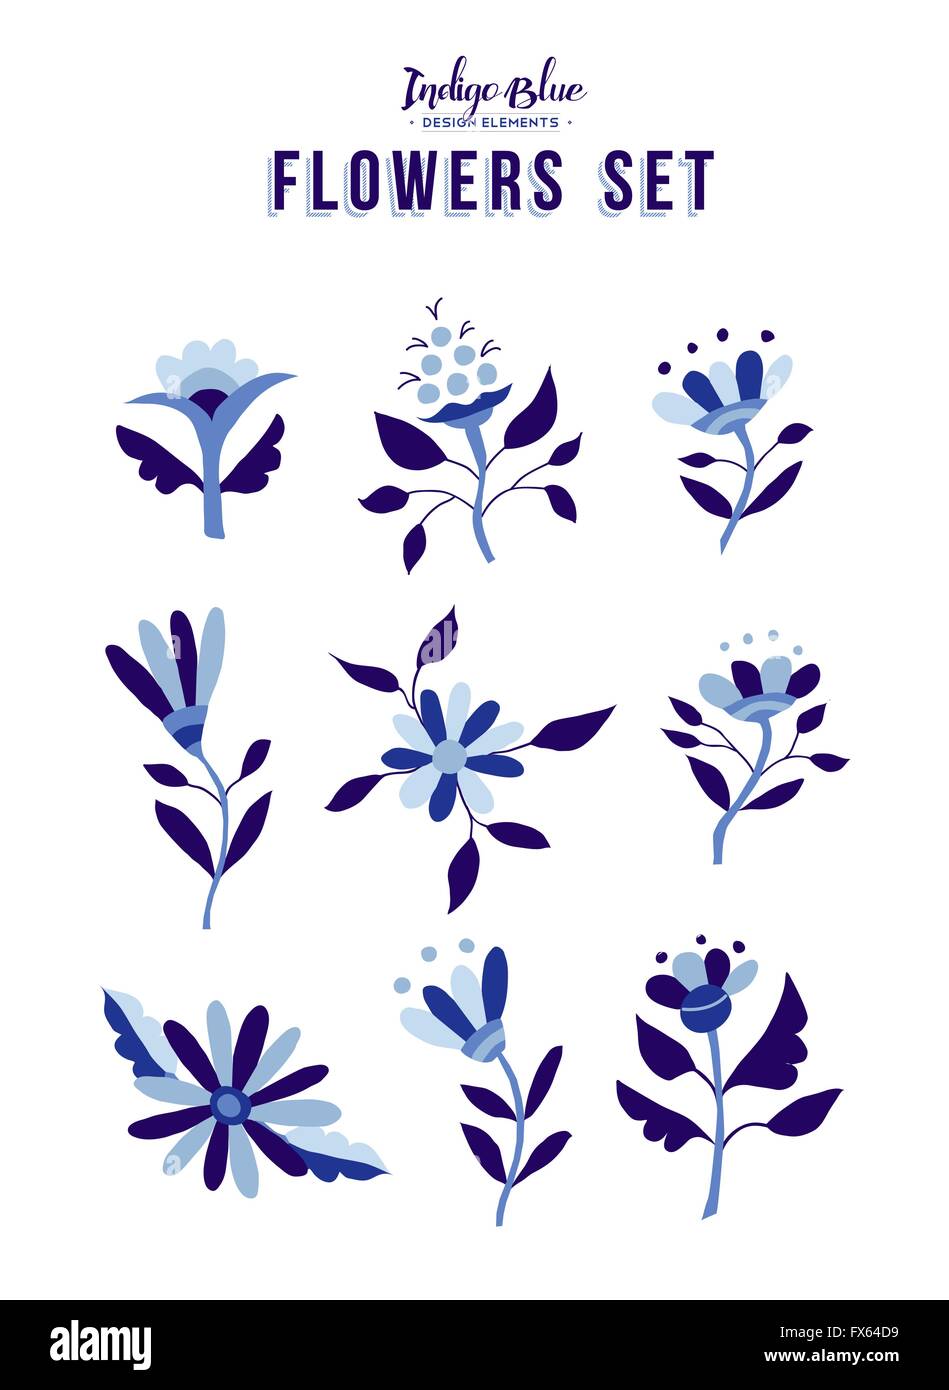 Set of indigo blue flower icon elements, trendy spring time nature illustrations in vintage style. EPS10 vector. Stock Vector